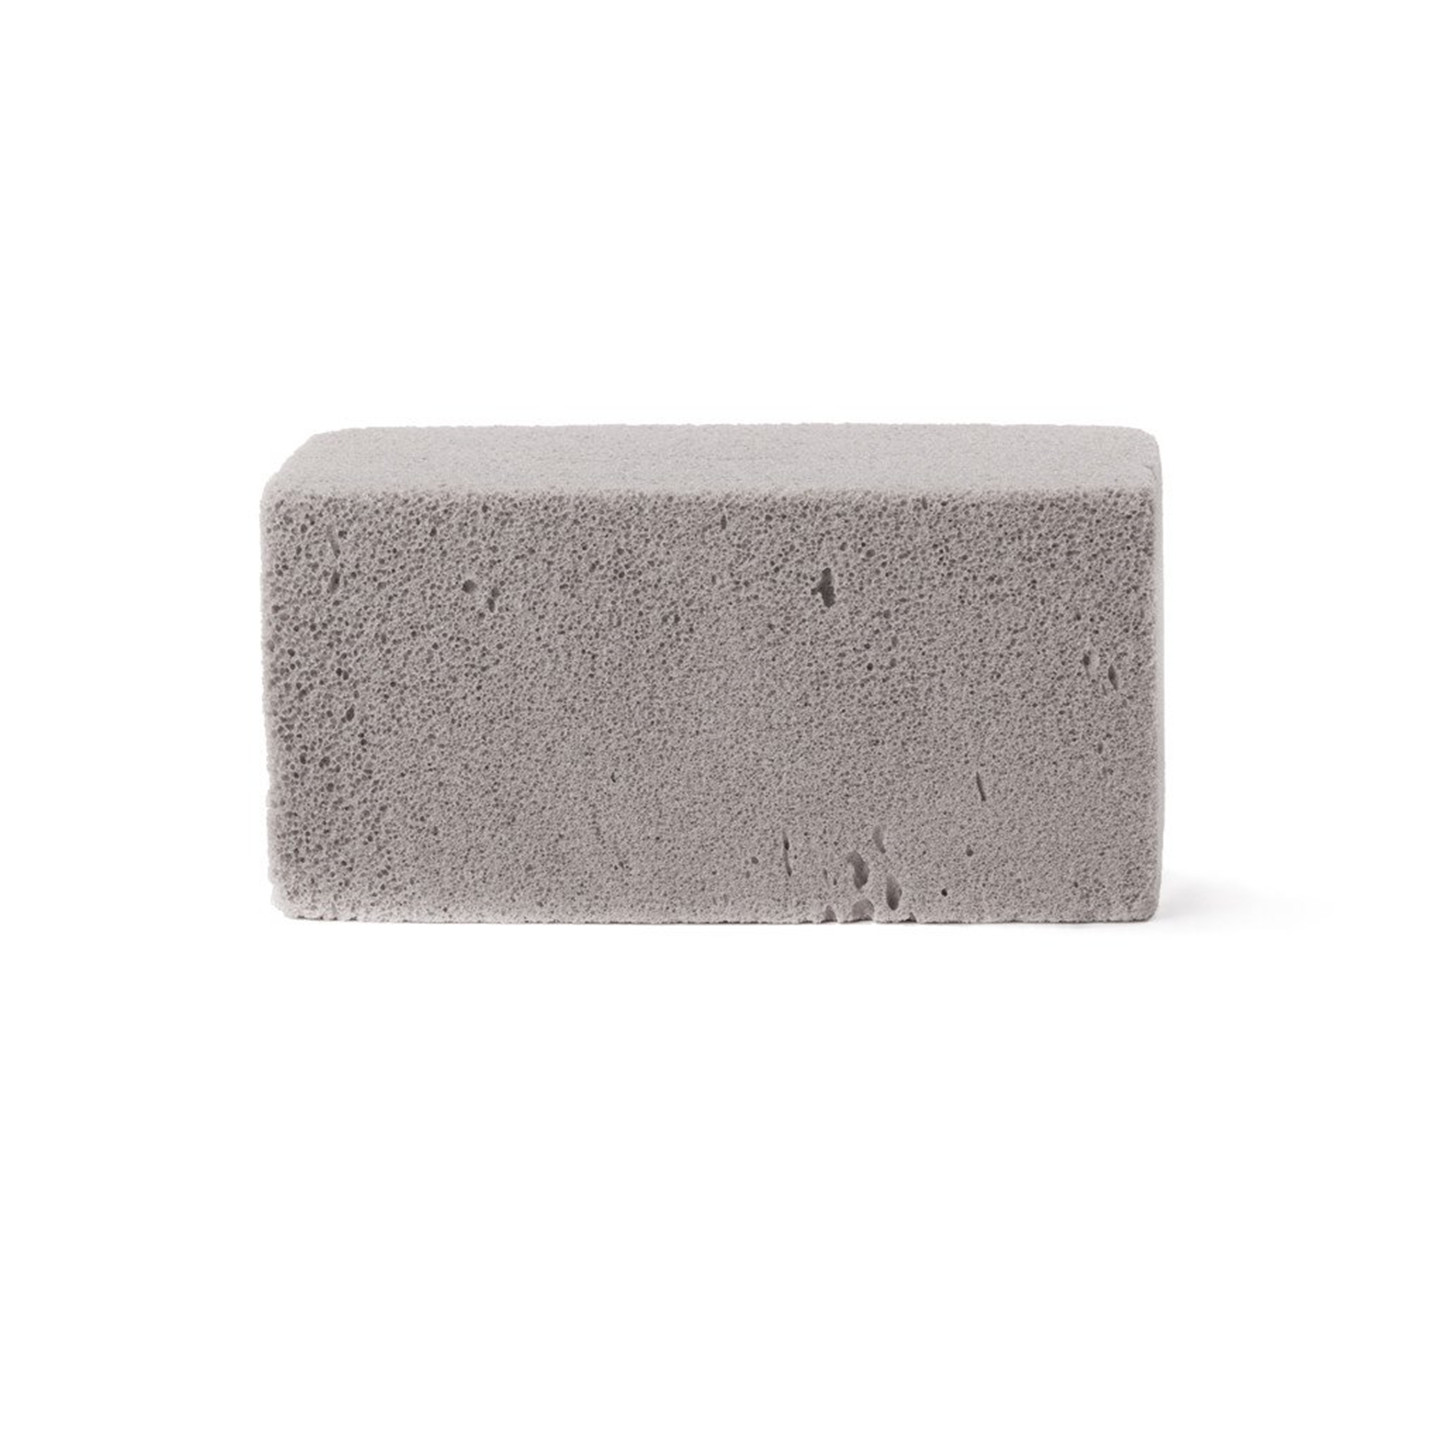  Griddle Grill Cleaning Brick-A Magic Stone for Safely and Quickly Cleaning Flat Top Grills or Griddles,Grills Grate and More - Easily Removes Stubborn Grime